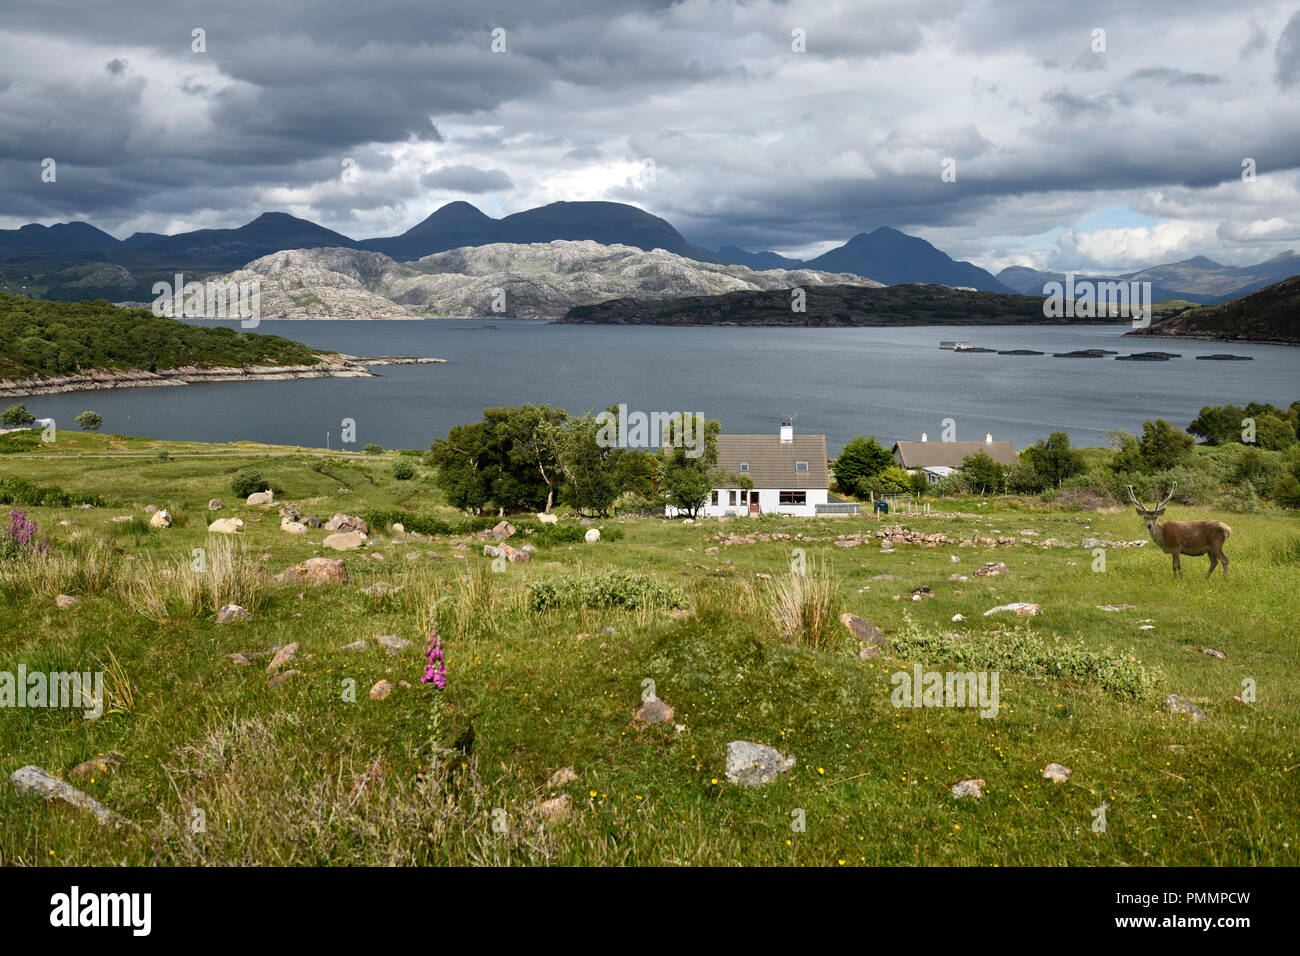 Red deer and sheep at house at Kenmore on Loch a Chracaich of Loch Torridon with fish farm pens Scottish Highlands Scotland UK Stock Photo